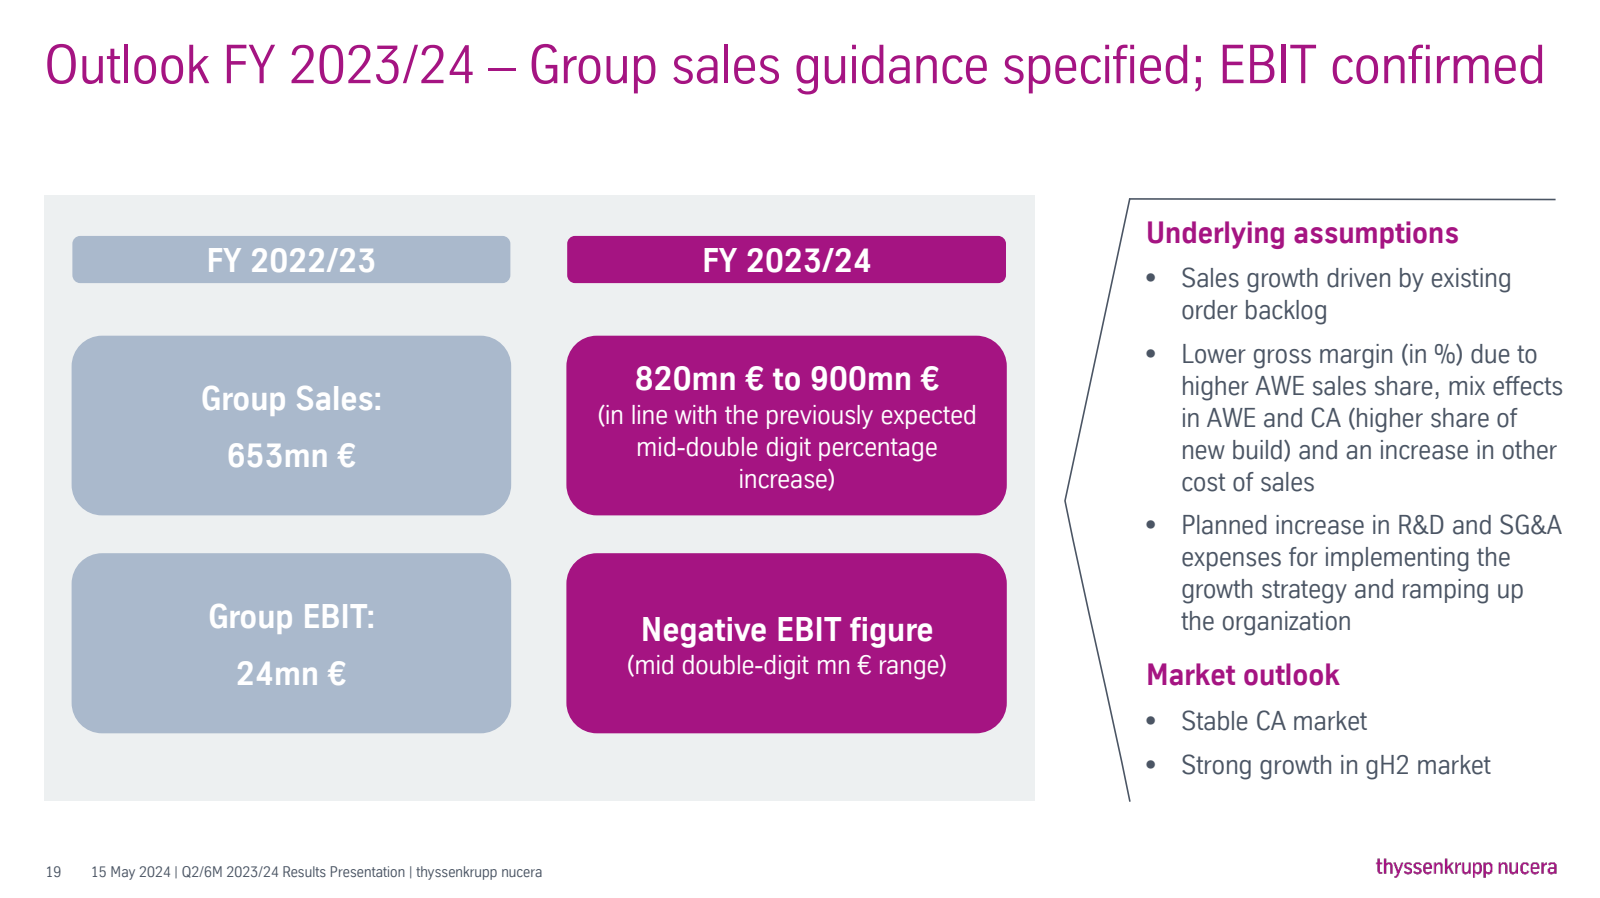 Outlook FY 2023/24 -